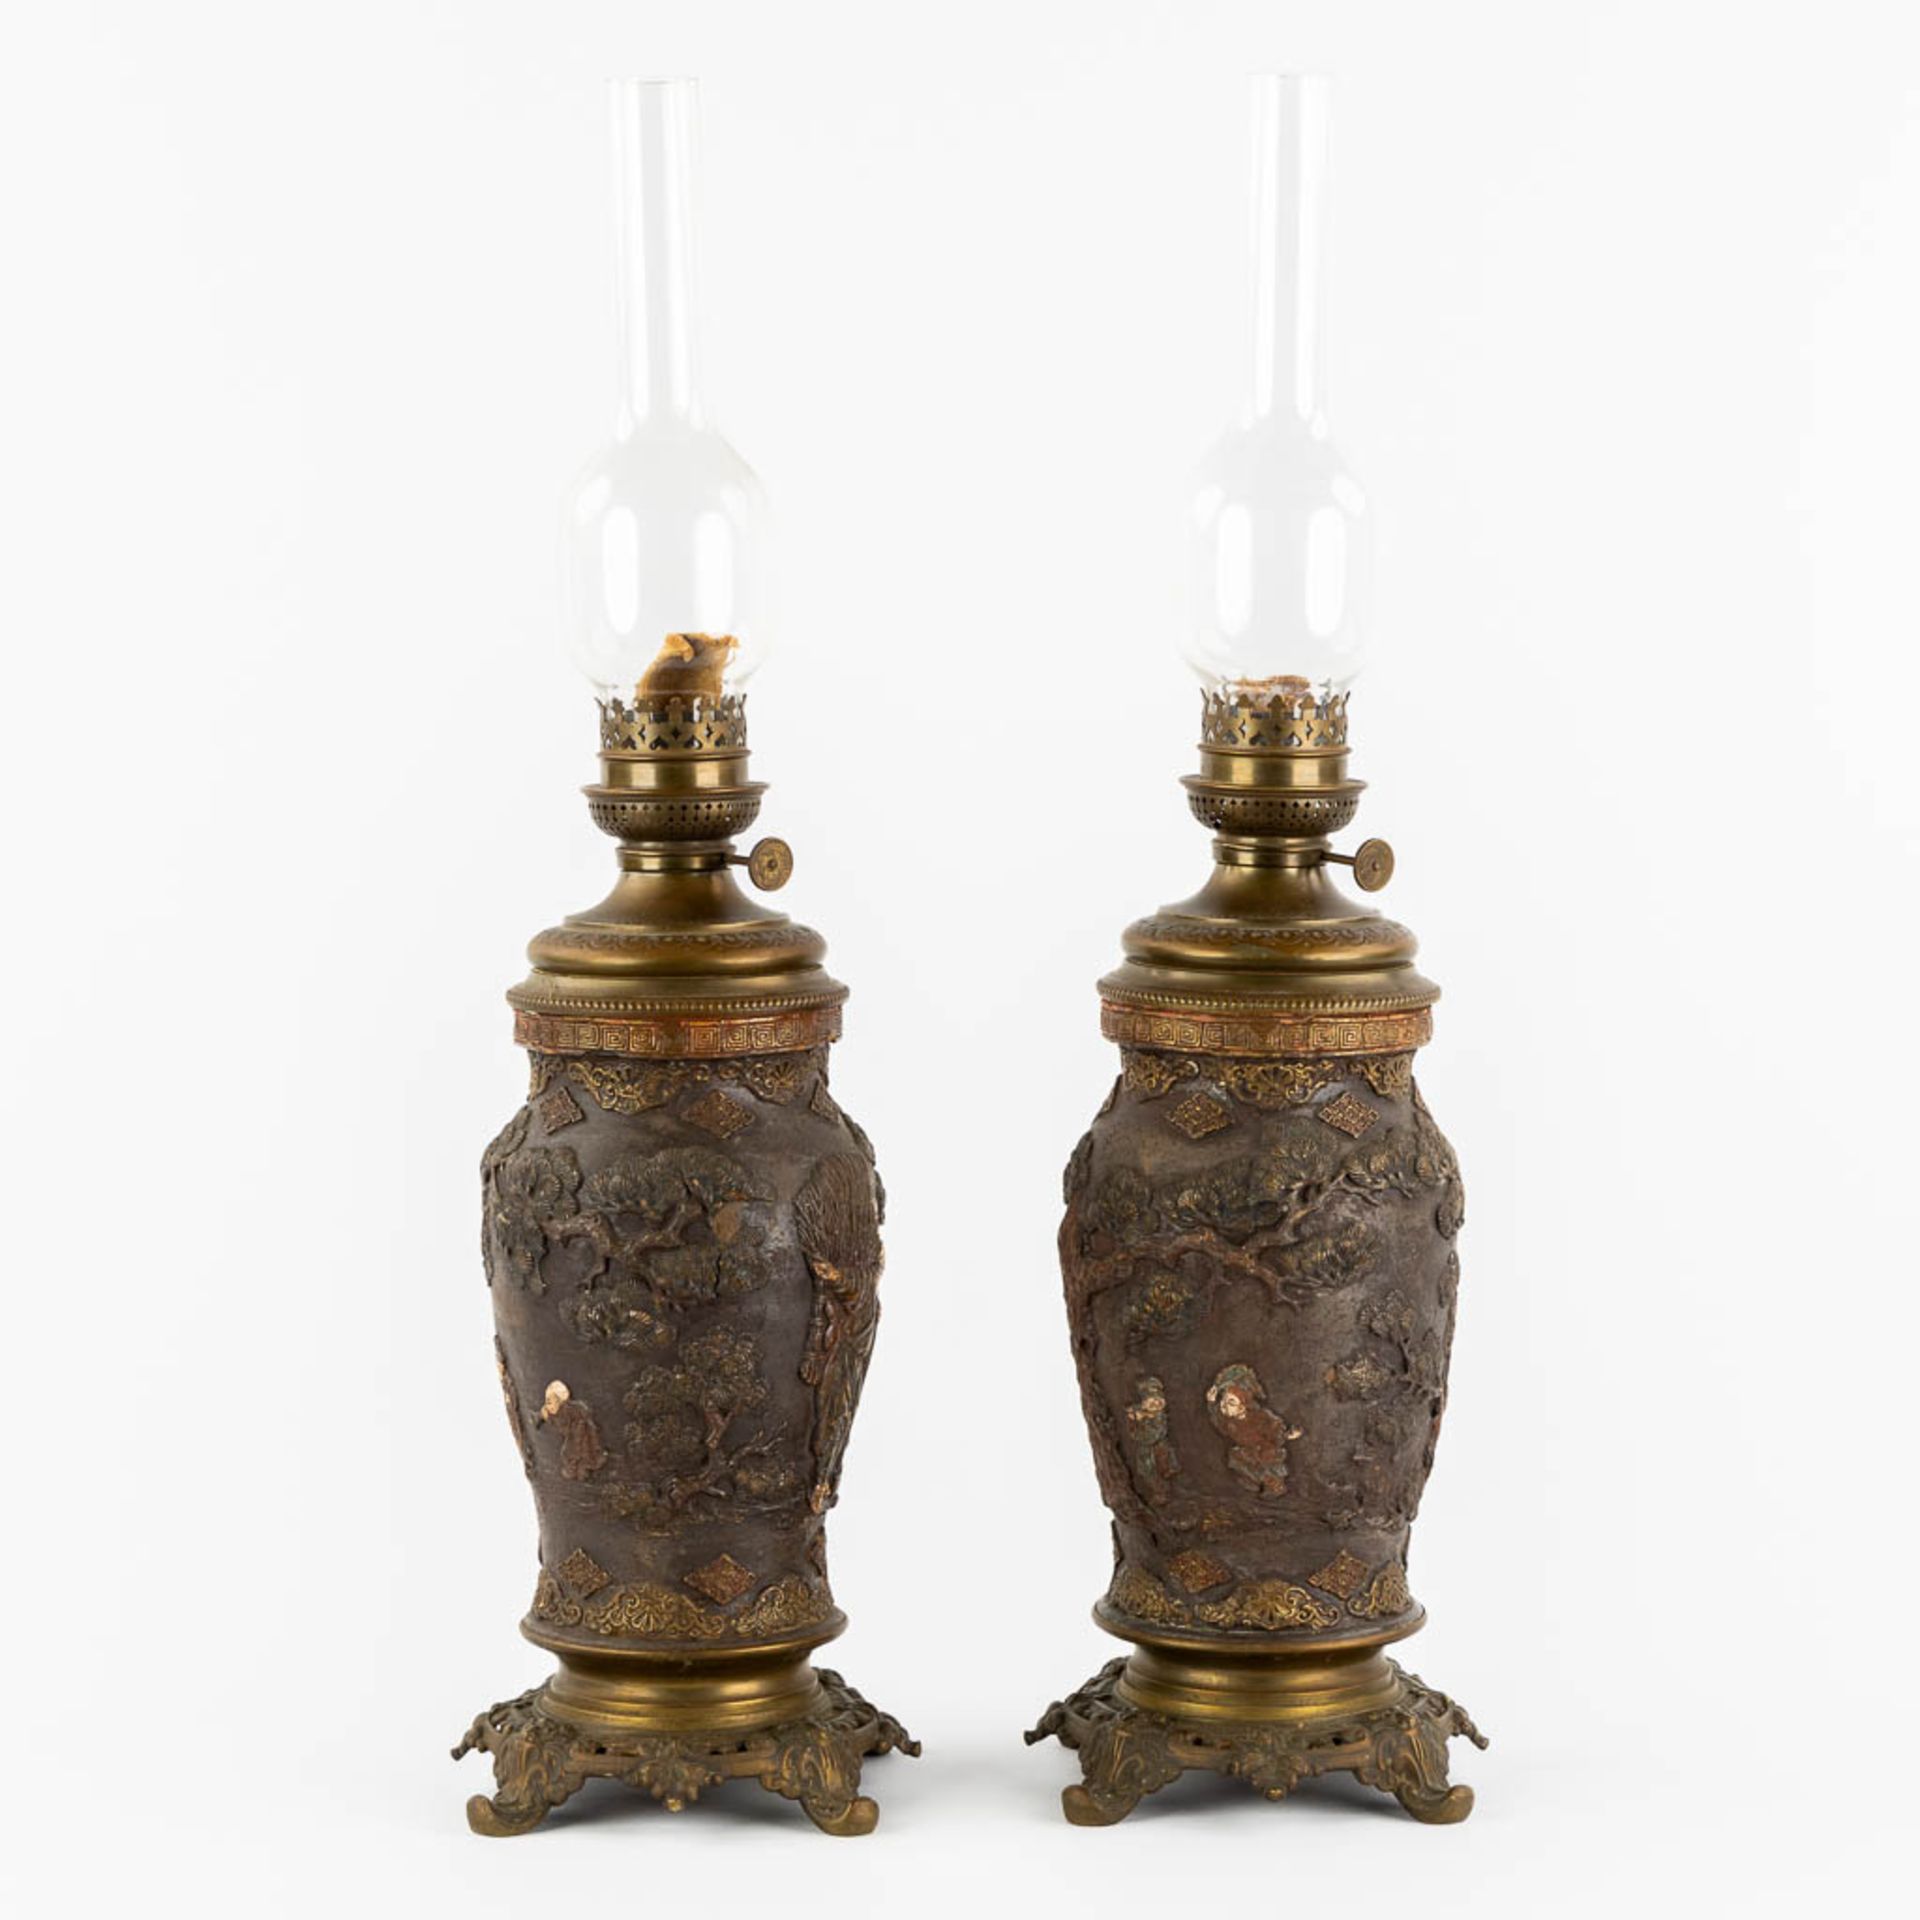 An Oriental pair of oil lamps, terracotta mounted with bronze. Circa 1900. (H:66 x D:18 cm) - Image 5 of 17